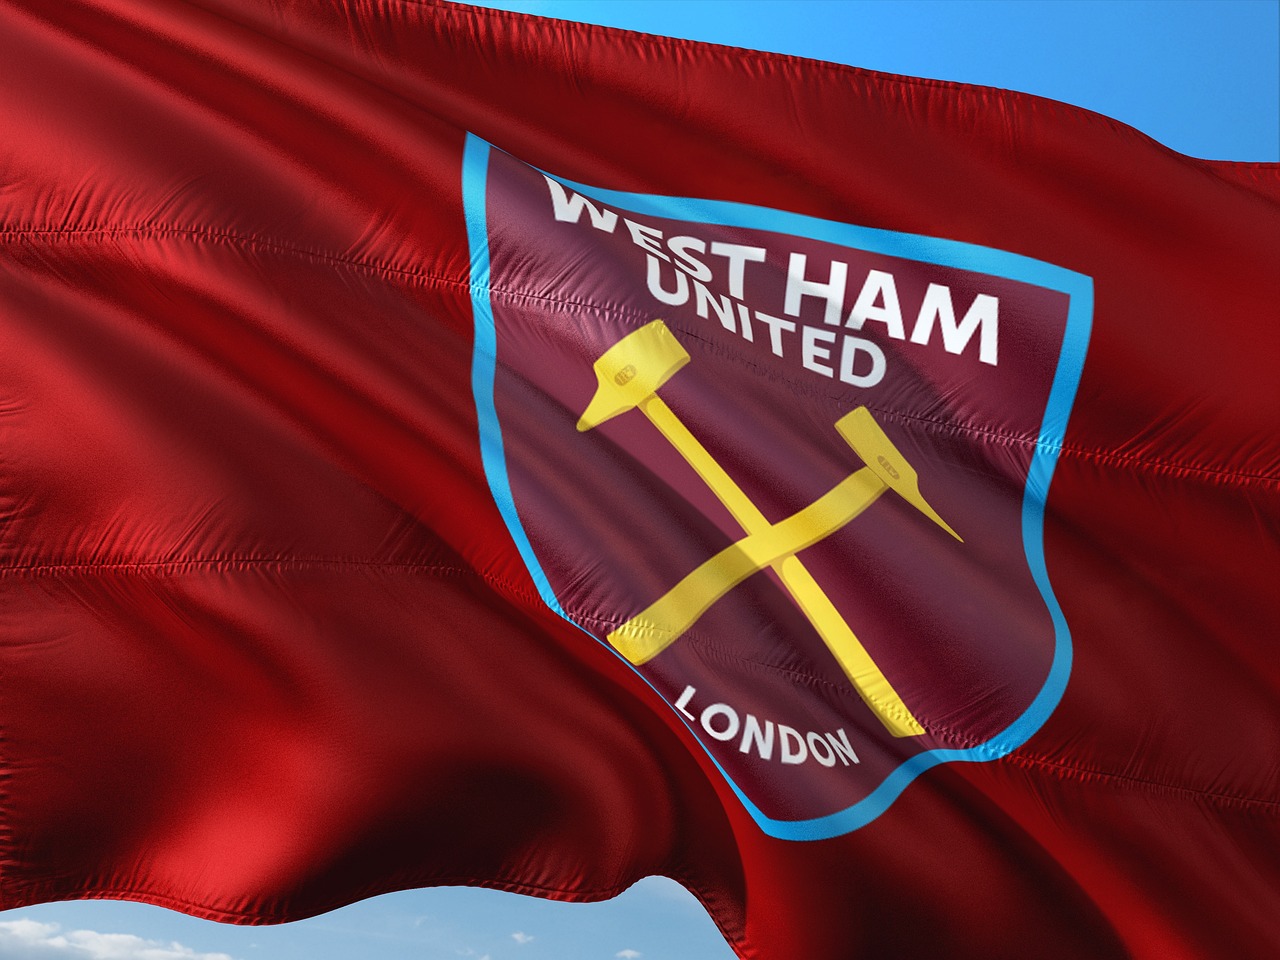 West Ham United players partner with Frinton Golf Club for event